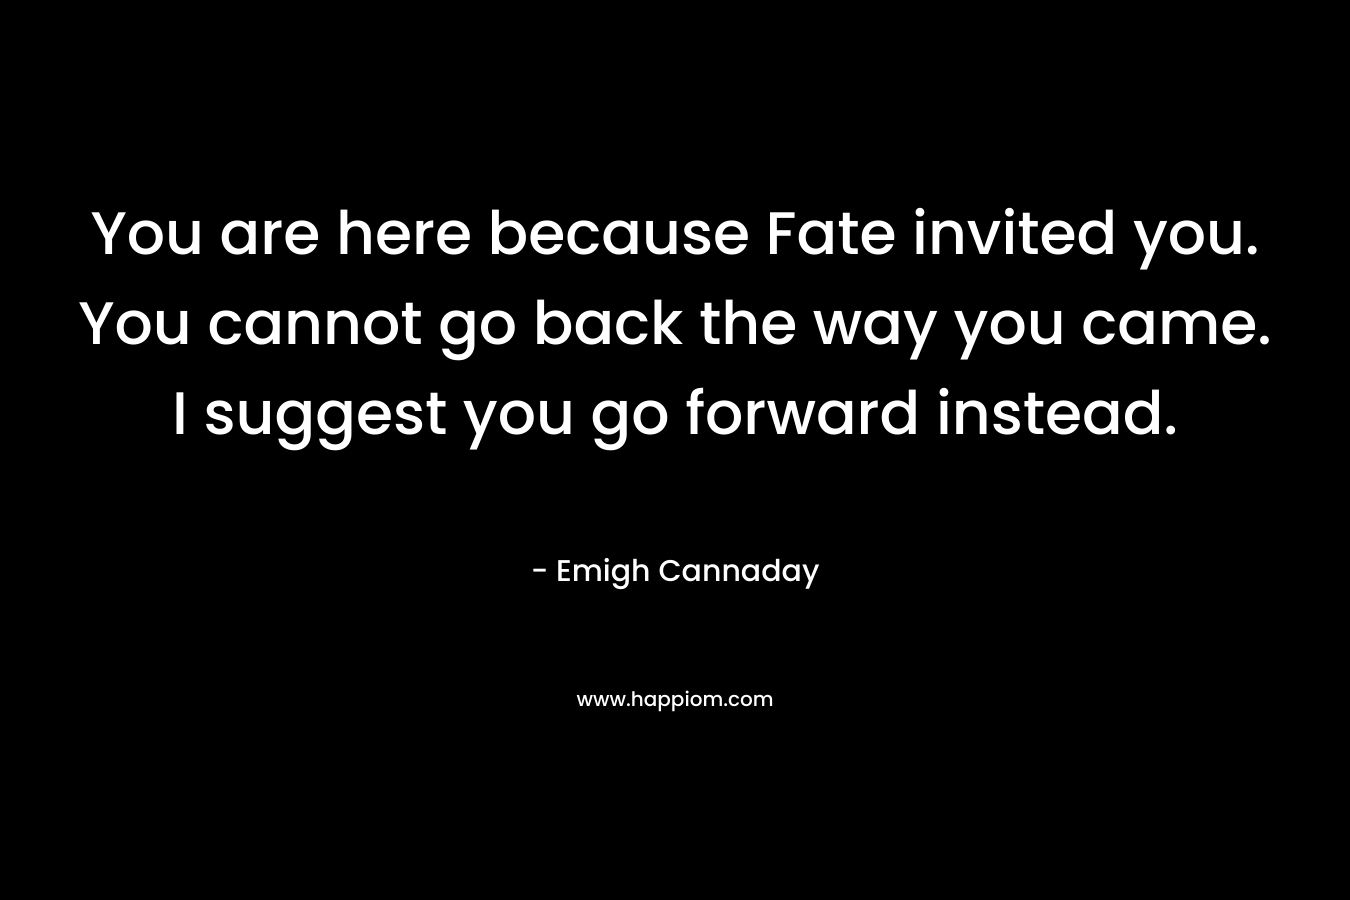 You are here because Fate invited you. You cannot go back the way you came. I suggest you go forward instead. – Emigh Cannaday